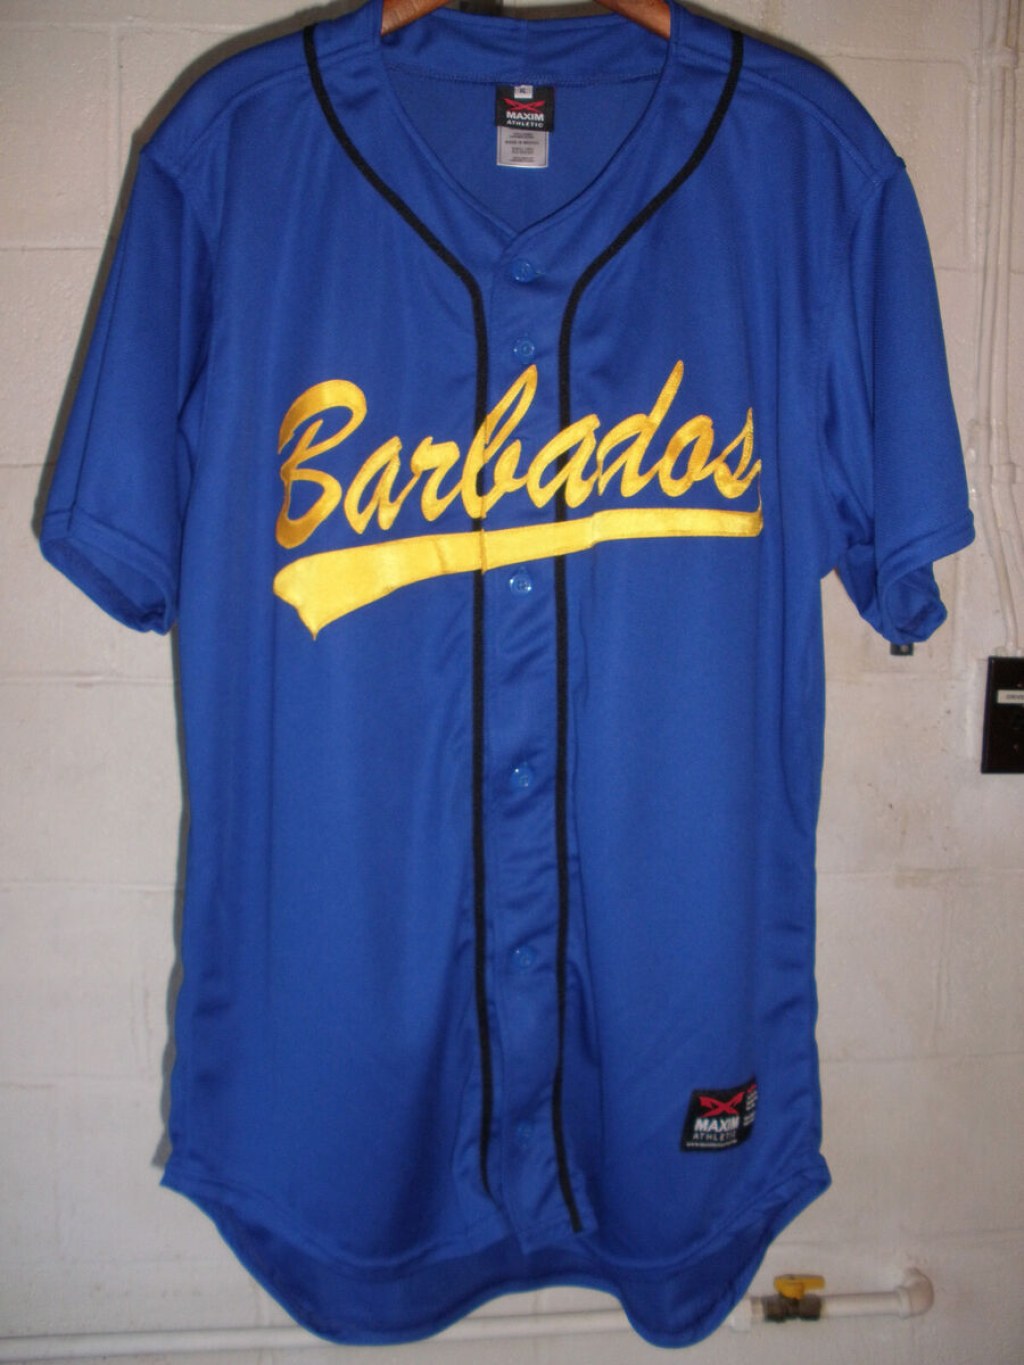 Picture of: Maxim Athletic Team Barbados Baseball Jersey — Size XL ( equivalent)